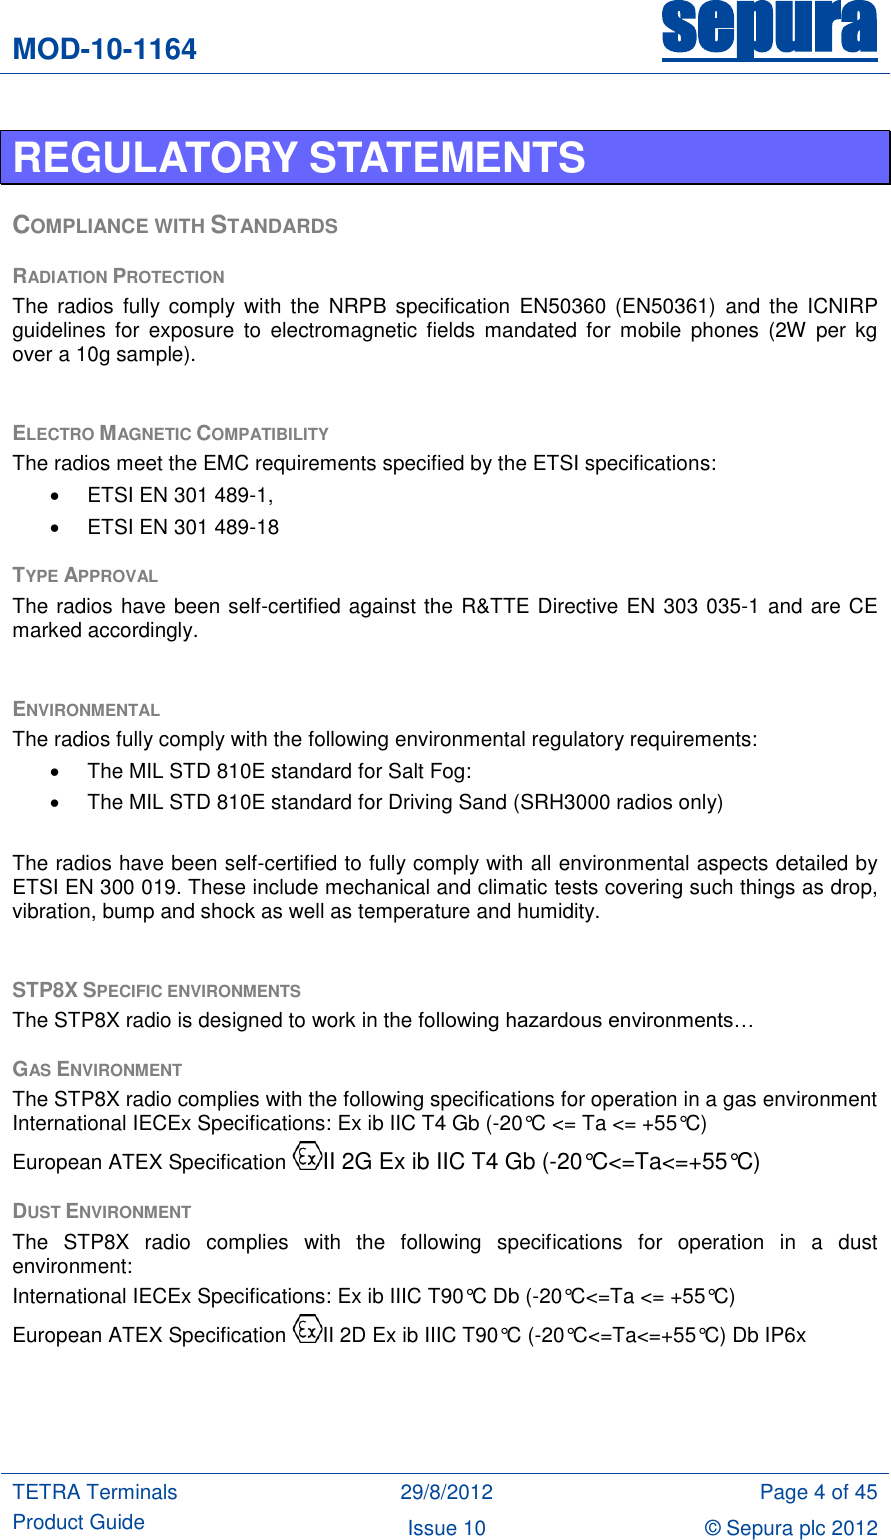 MOD-10-1164 sepura  TETRA Terminals Product Guide 29/8/2012 Page 4 of 45 Issue 10 © Sepura plc 2012   REGULATORY STATEMENTS COMPLIANCE WITH STANDARDS RADIATION PROTECTION The  radios  fully comply  with  the  NRPB  specification  EN50360  (EN50361)  and  the  ICNIRP guidelines  for  exposure  to  electromagnetic  fields  mandated  for  mobile  phones  (2W  per  kg over a 10g sample).  ELECTRO MAGNETIC COMPATIBILITY The radios meet the EMC requirements specified by the ETSI specifications:   ETSI EN 301 489-1,   ETSI EN 301 489-18 TYPE APPROVAL The radios have been self-certified against the R&amp;TTE Directive EN 303 035-1 and are CE marked accordingly.  ENVIRONMENTAL The radios fully comply with the following environmental regulatory requirements:   The MIL STD 810E standard for Salt Fog:   The MIL STD 810E standard for Driving Sand (SRH3000 radios only)  The radios have been self-certified to fully comply with all environmental aspects detailed by ETSI EN 300 019. These include mechanical and climatic tests covering such things as drop, vibration, bump and shock as well as temperature and humidity.  STP8X SPECIFIC ENVIRONMENTS The STP8X radio is designed to work in the following hazardous environments… GAS ENVIRONMENT The STP8X radio complies with the following specifications for operation in a gas environment International IECEx Specifications: Ex ib IIC T4 Gb (-20°C &lt;= Ta &lt;= +55°C)  European ATEX Specification  II 2G Ex ib IIC T4 Gb (-20°C&lt;=Ta&lt;=+55°C) DUST ENVIRONMENT The  STP8X  radio  complies  with  the  following  specifications  for  operation  in  a  dust environment: International IECEx Specifications: Ex ib IIIC T90°C Db (-20°C&lt;=Ta &lt;= +55°C)  European ATEX Specification  II 2D Ex ib IIIC T90°C (-20°C&lt;=Ta&lt;=+55°C) Db IP6x   